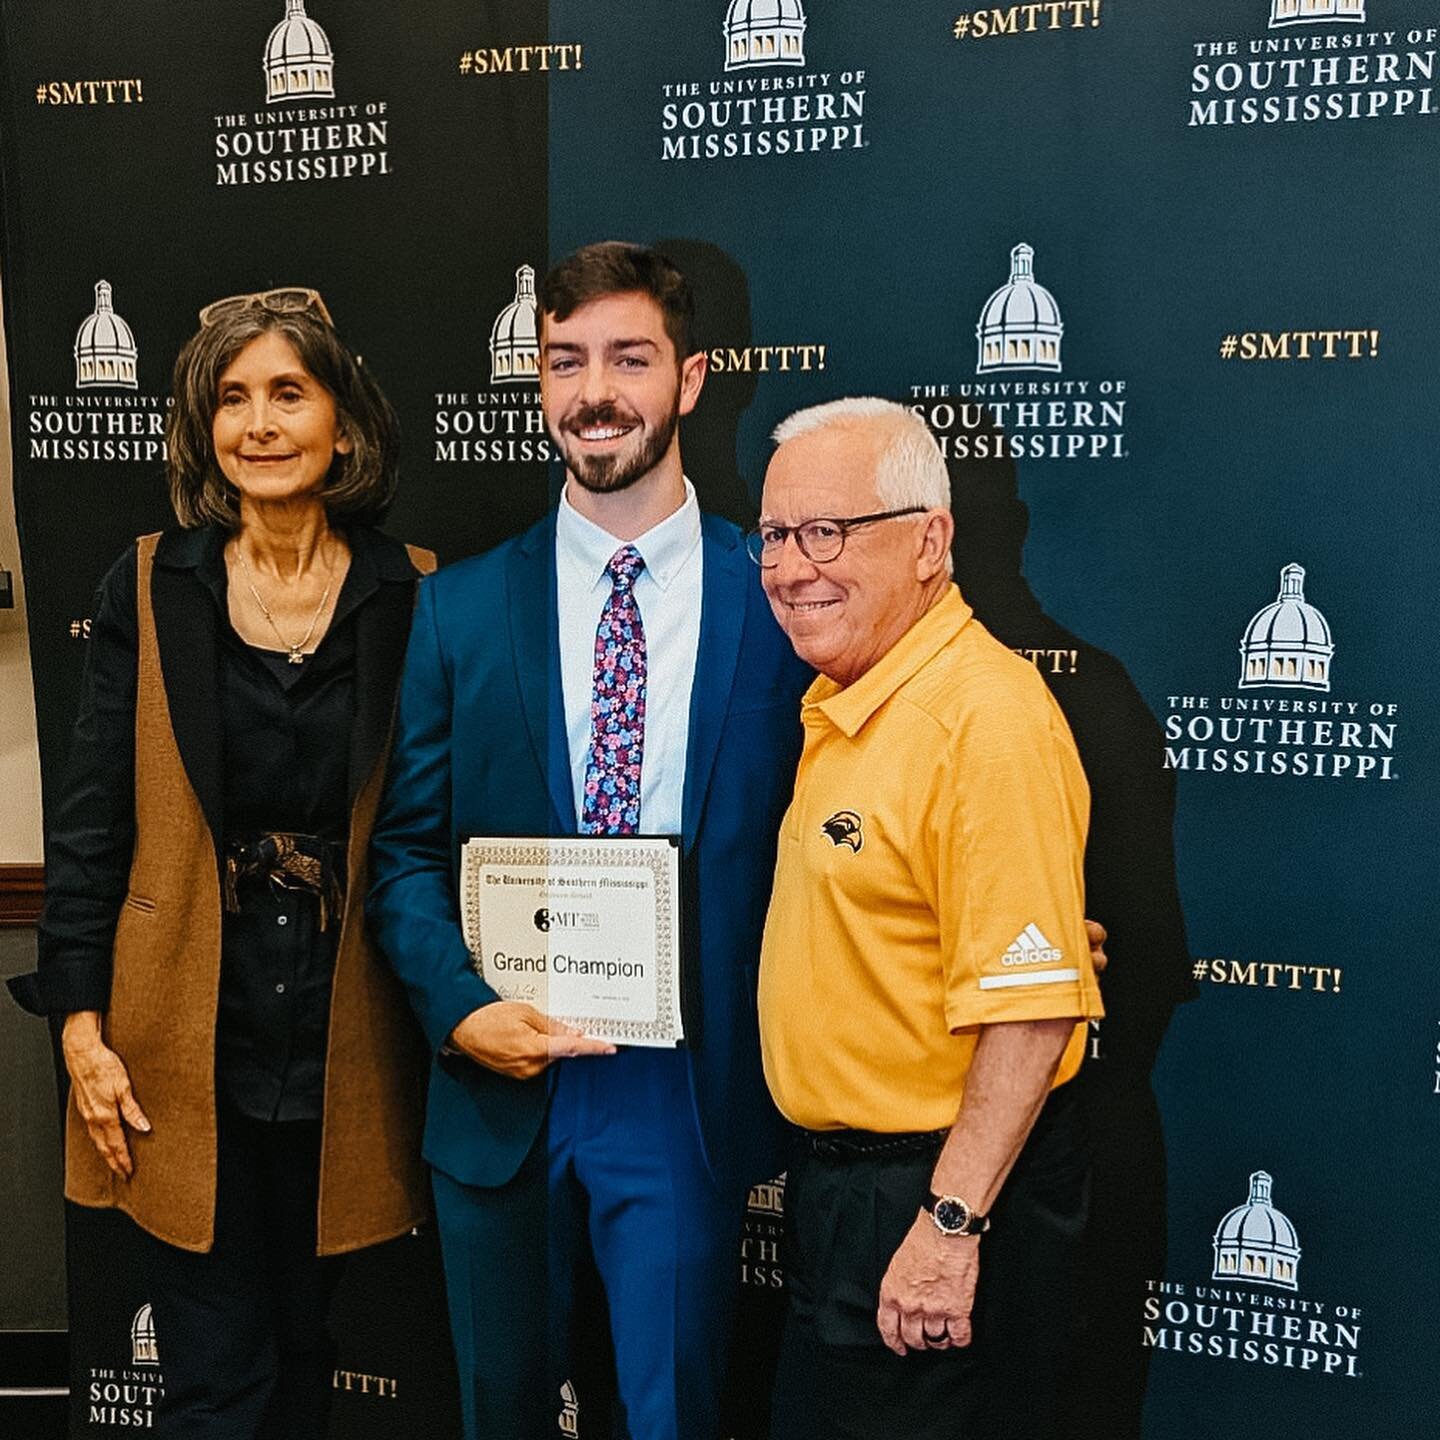 ✨GRAD STUDENT SHOUT OUT✨
Back in November, @evanstacy competed in USM&rsquo;s 3 Minute Thesis competition. That&rsquo;s 3 minutes to explain your research in non-technical language using one single powerpoint slide as a visual aid. He won 1st place a